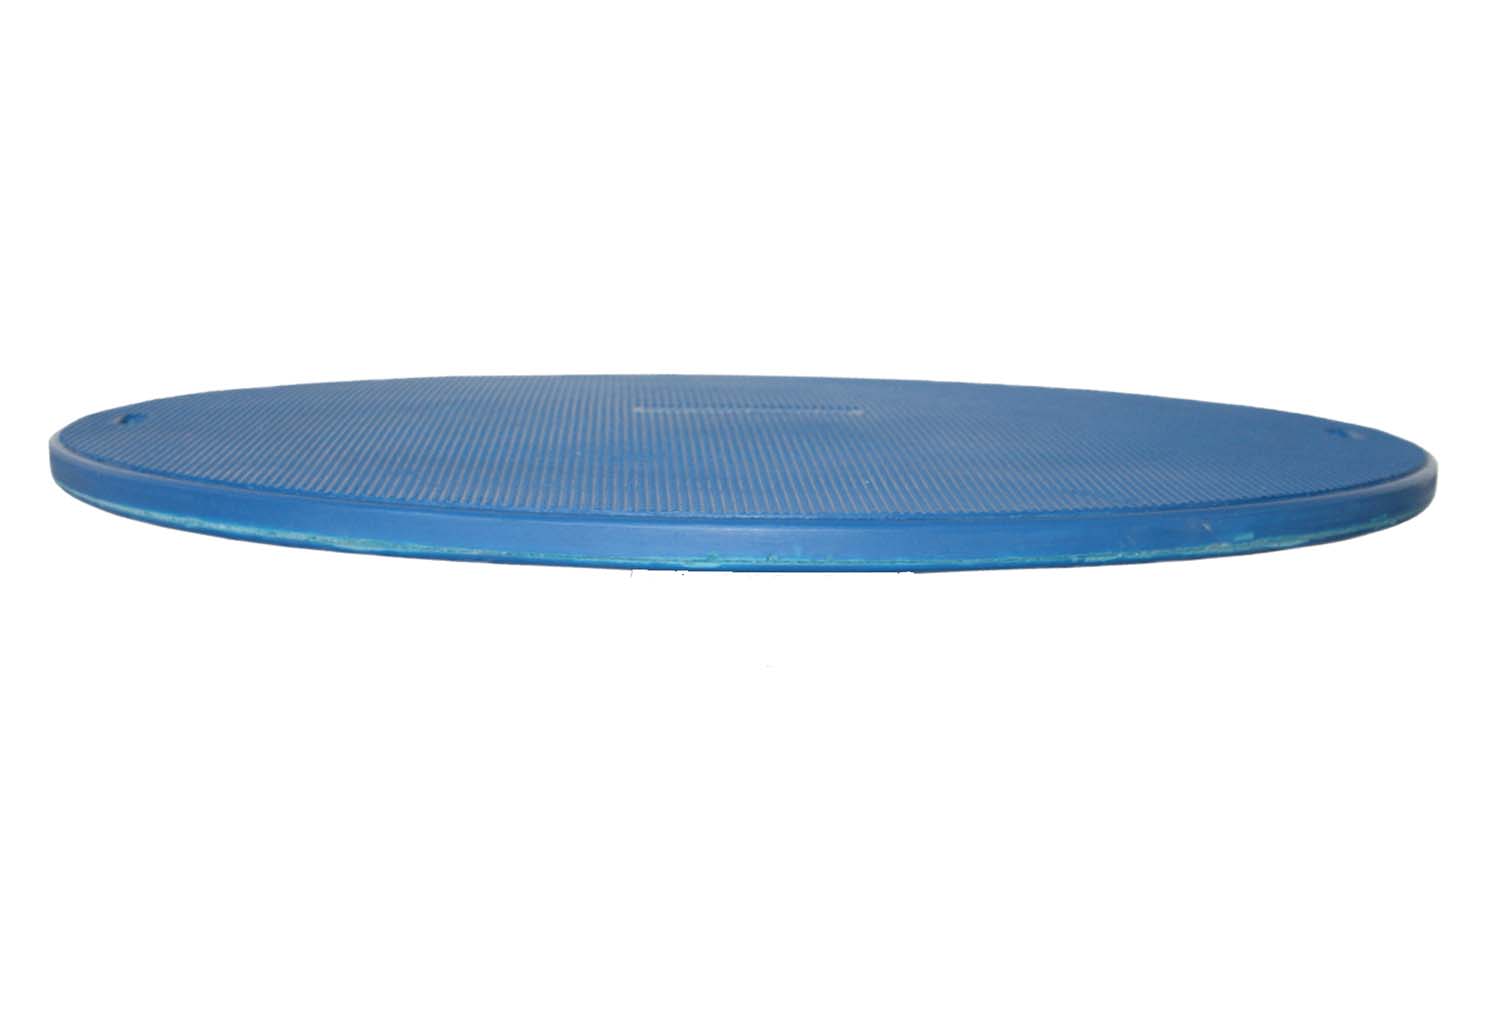 16" Circular Board for the Cando Stability Trainer